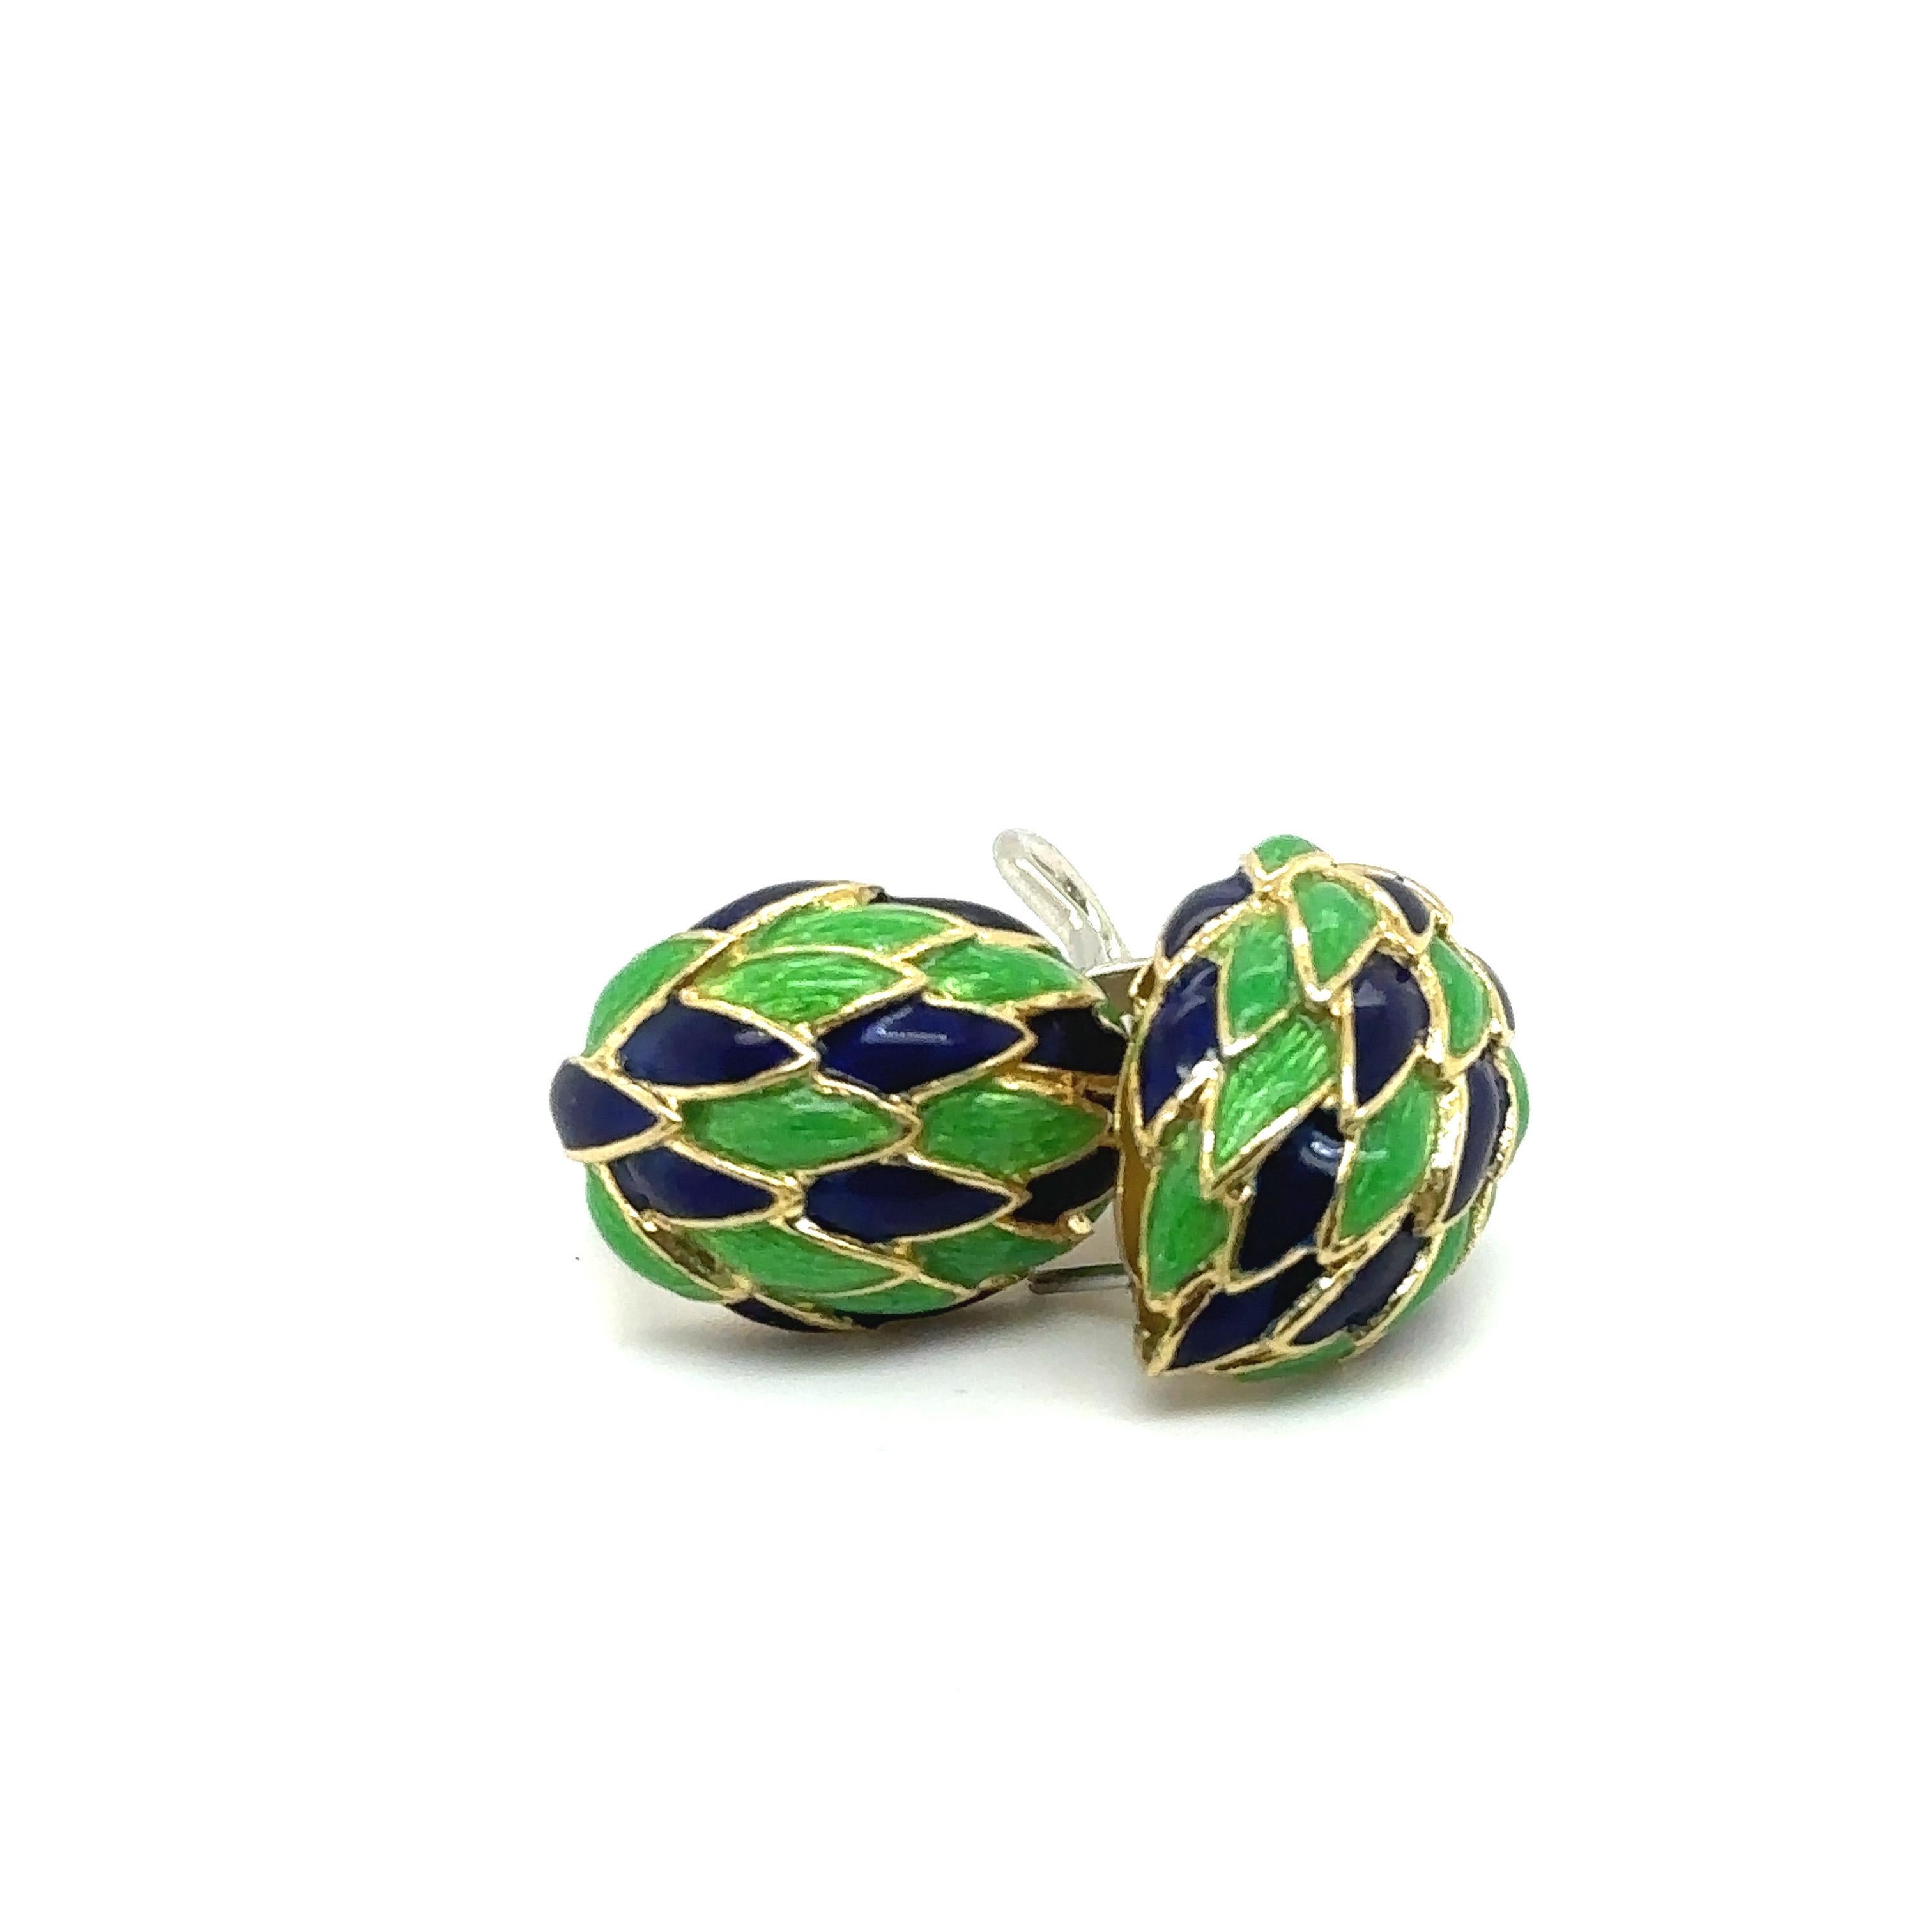 This beautiful Cartier earrings from the 1960s are made of 18kt yellow gold and of blue and green guilloché enamel scales. 
Signed 'CARTIER ITALY' Numbered '54915'
Comes with original Cartier pouch. 
The piece was brought to the Cartier boutique in